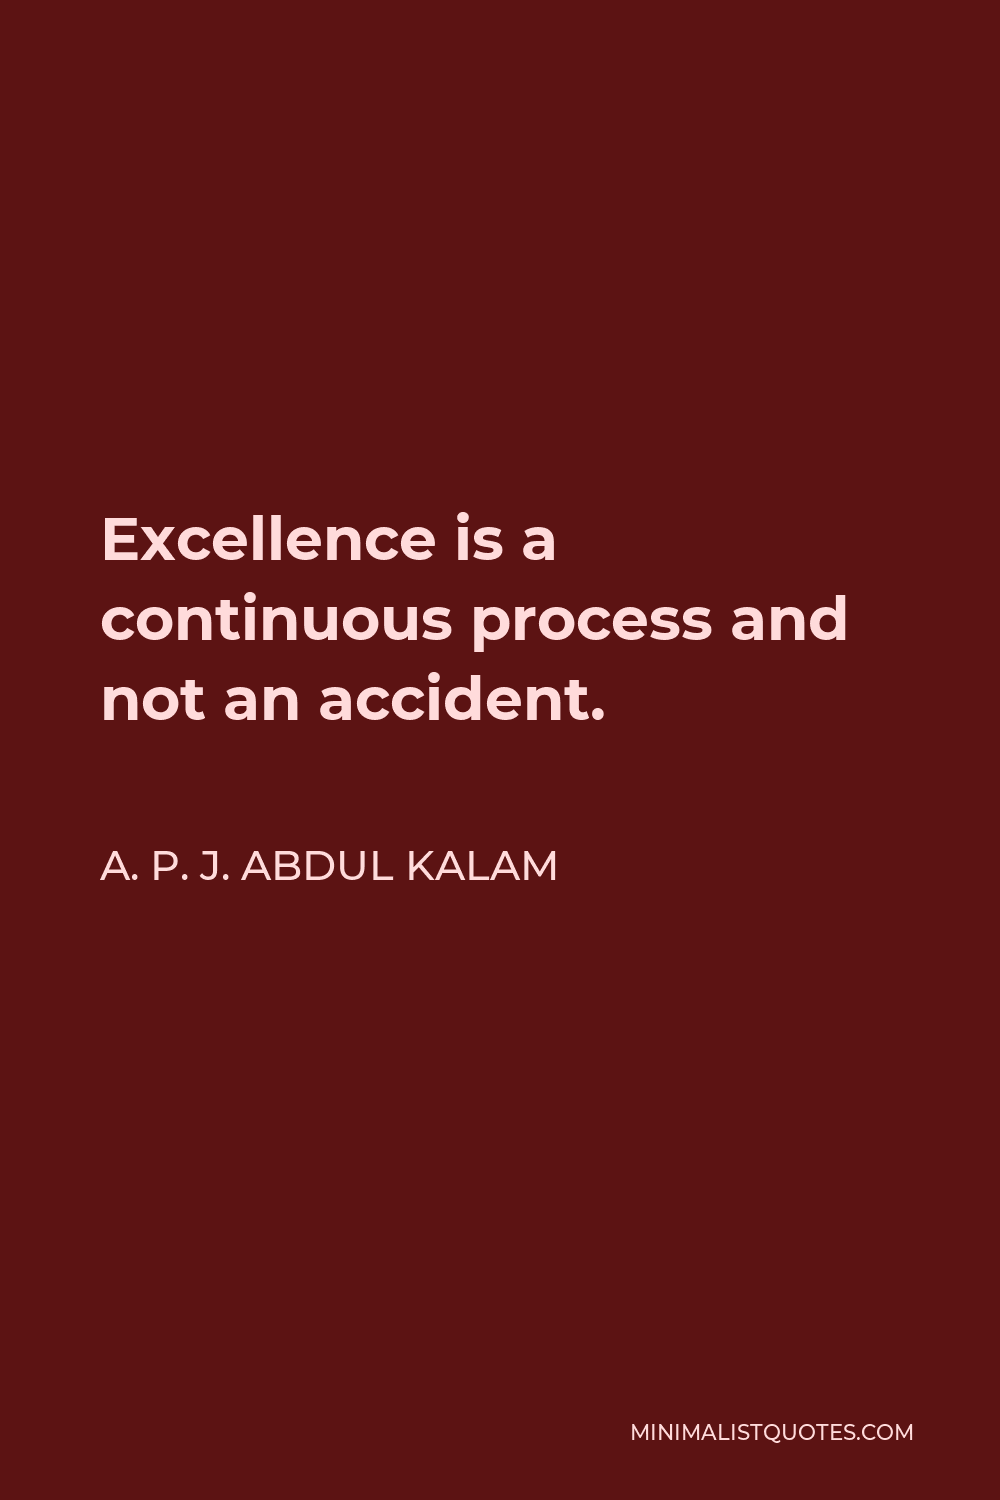 A. P. J. Abdul Kalam Quote - Excellence is a continuous process and not an accident.